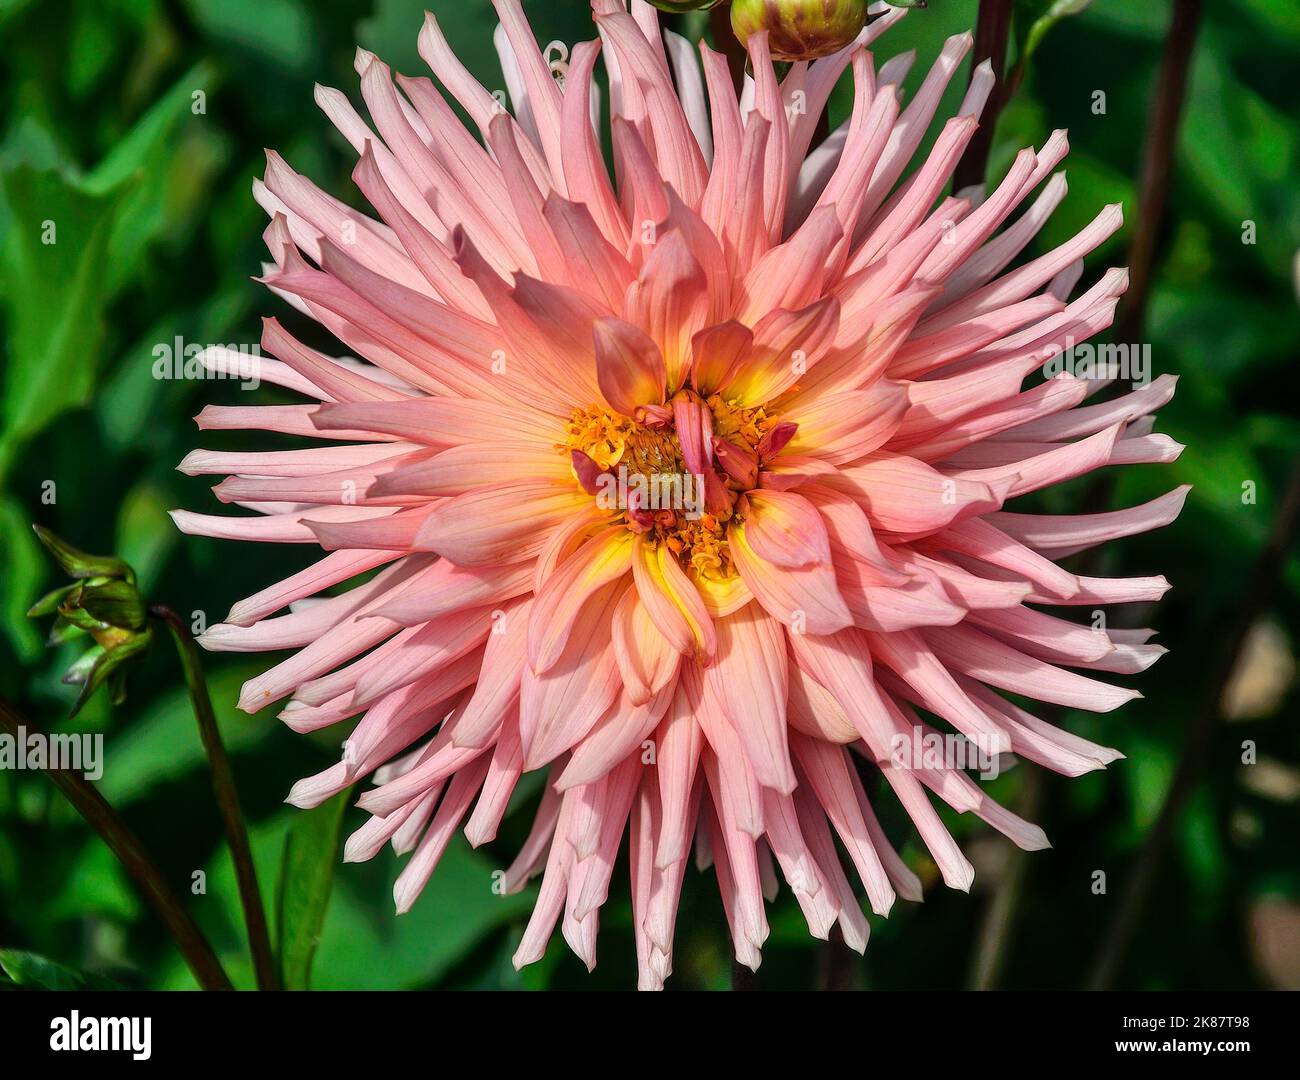 Single peach colored Cactus Dahlia flower, variety Piccolo, close up. Amazing perfection and elegance of Dahlia flower with delicate petals pink or pe Stock Photo